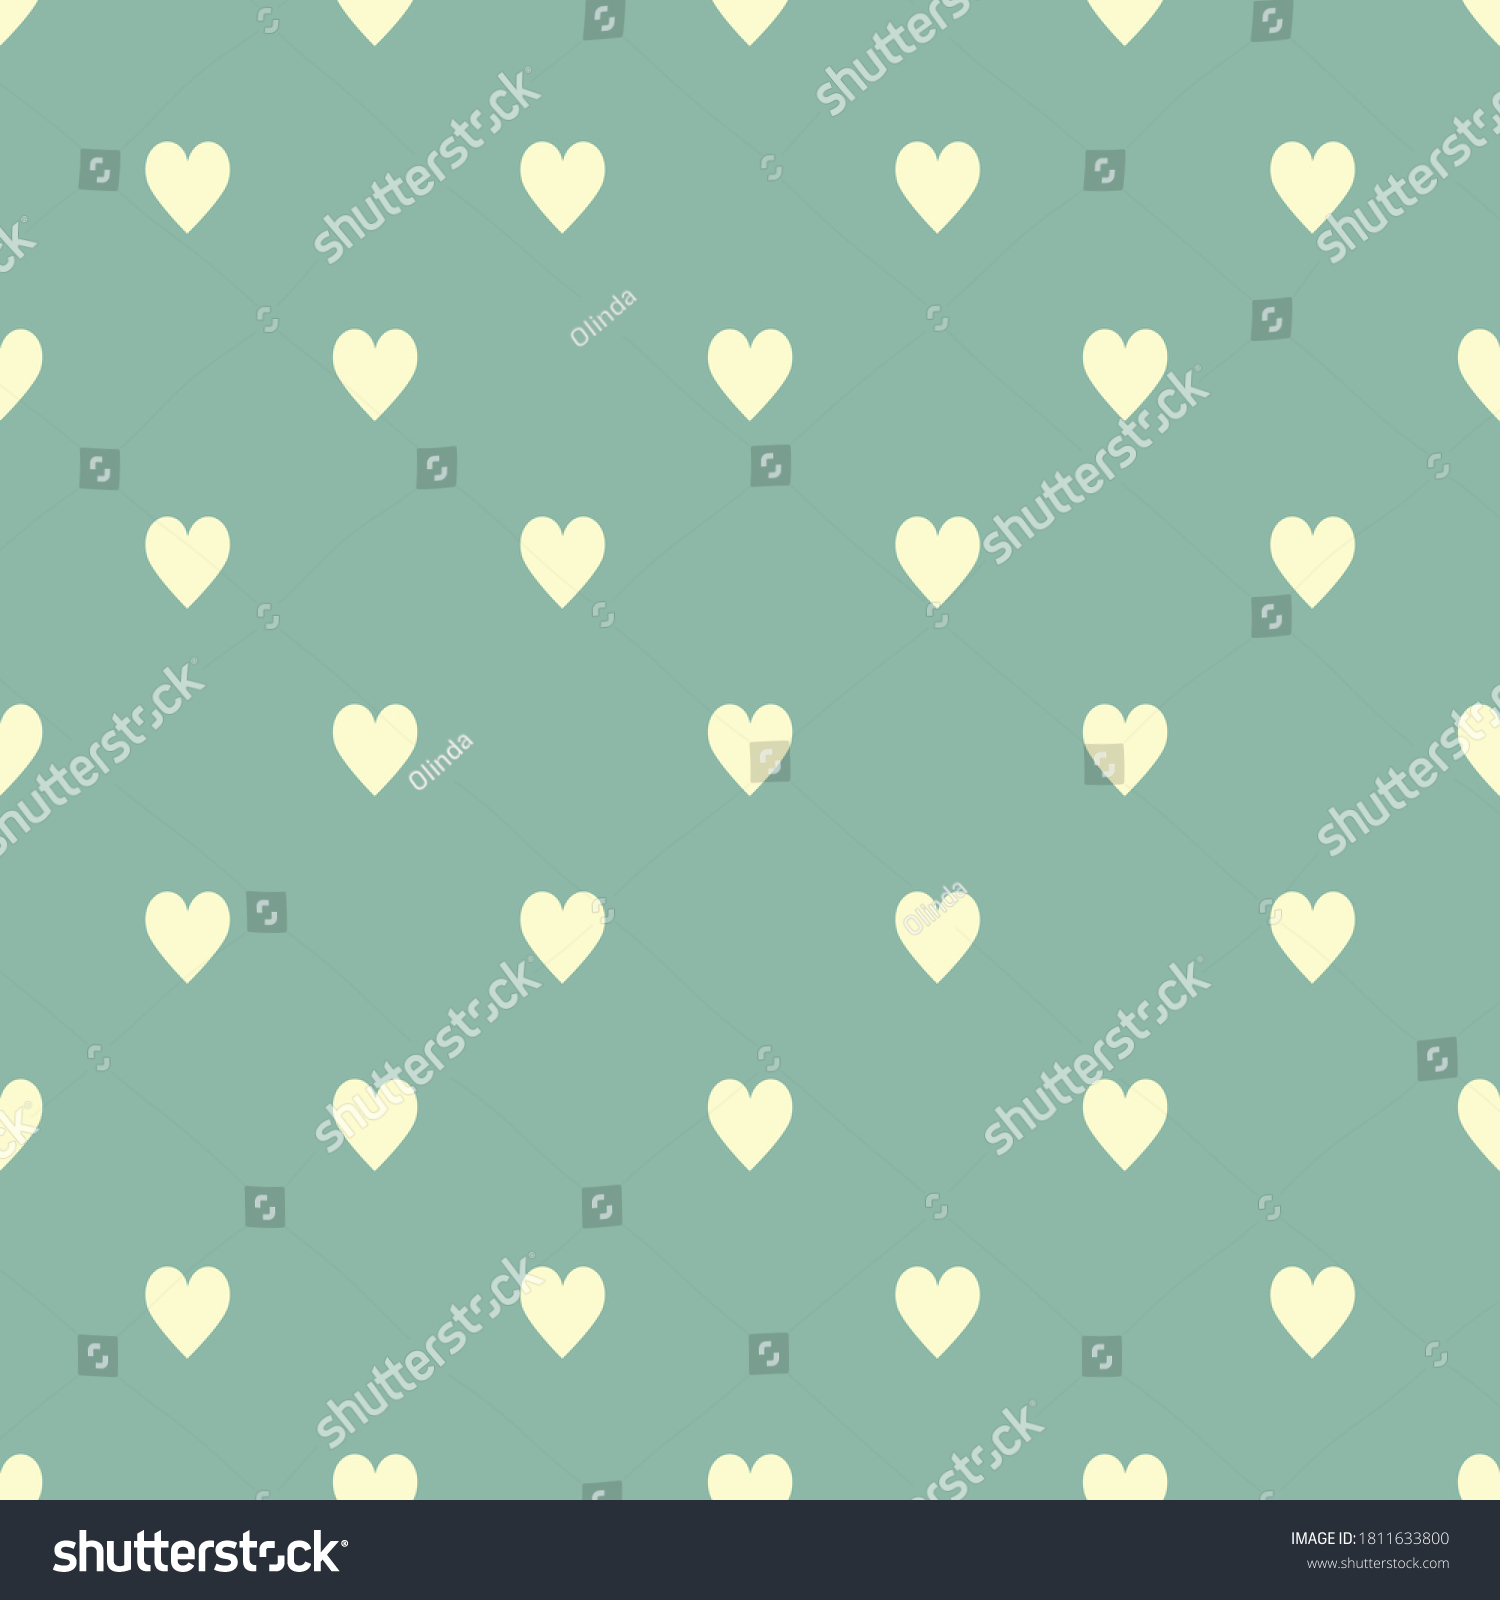 SVG of Seamless pattern off-white hearts on pastel vintage turquoise background. Elegant print for fabric textile gift paper scrapbook wallpaper kids clothes nursery decor svg